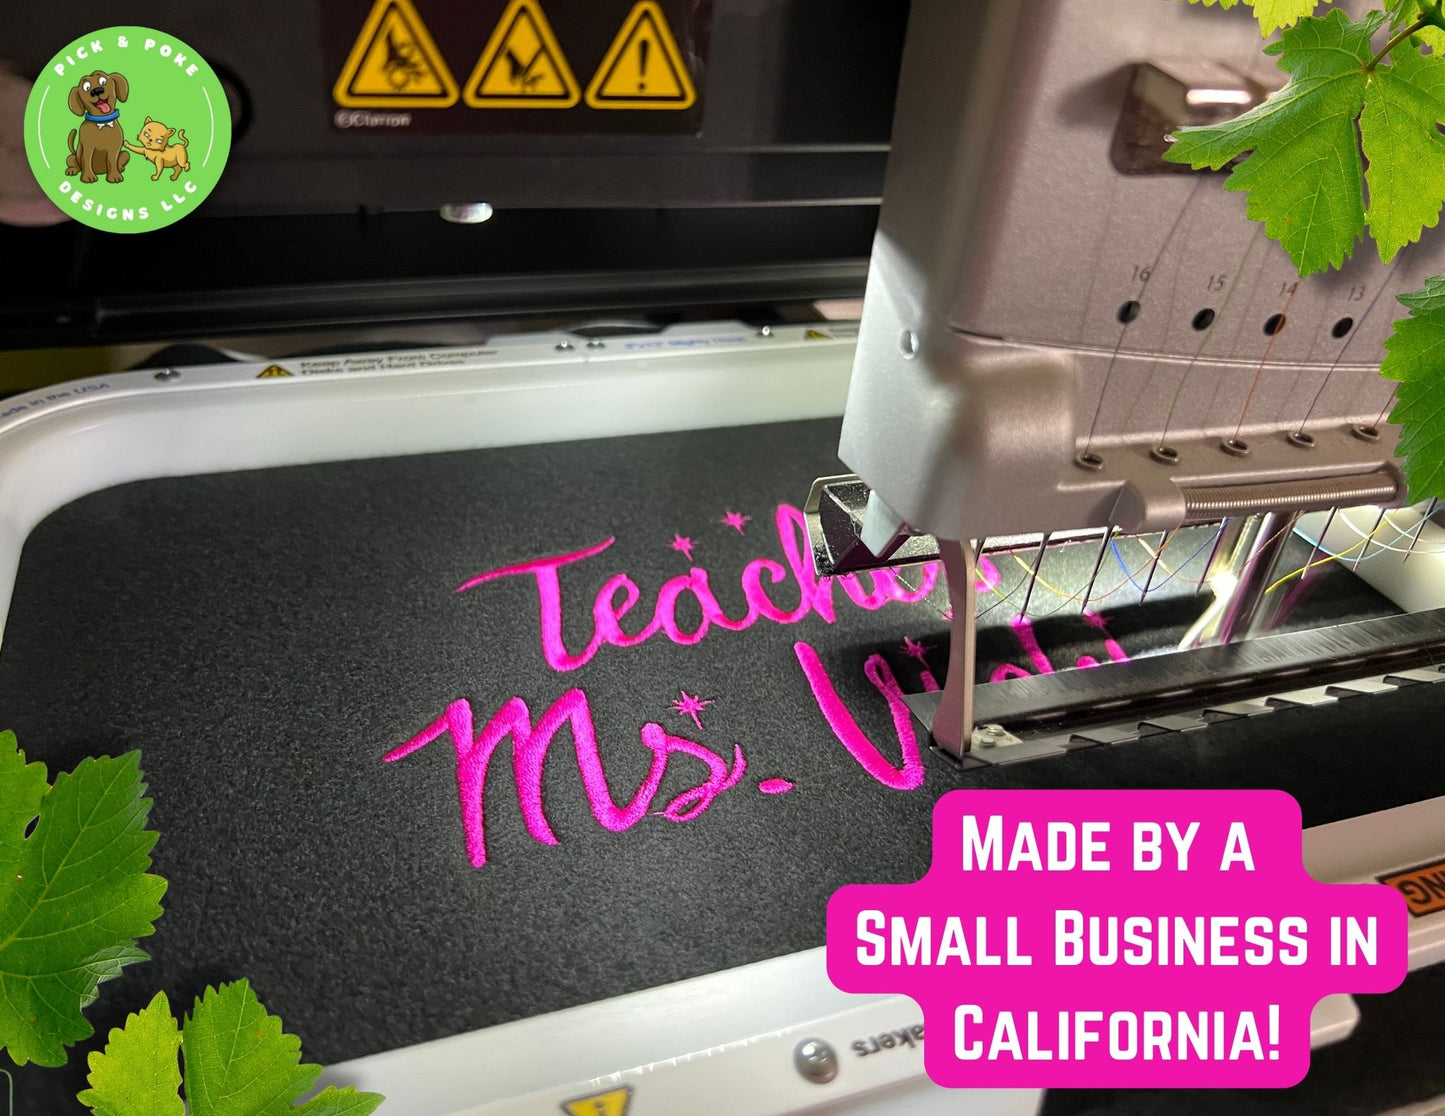 Embroidered teacher sweatshirts are made by a small business located in California. 